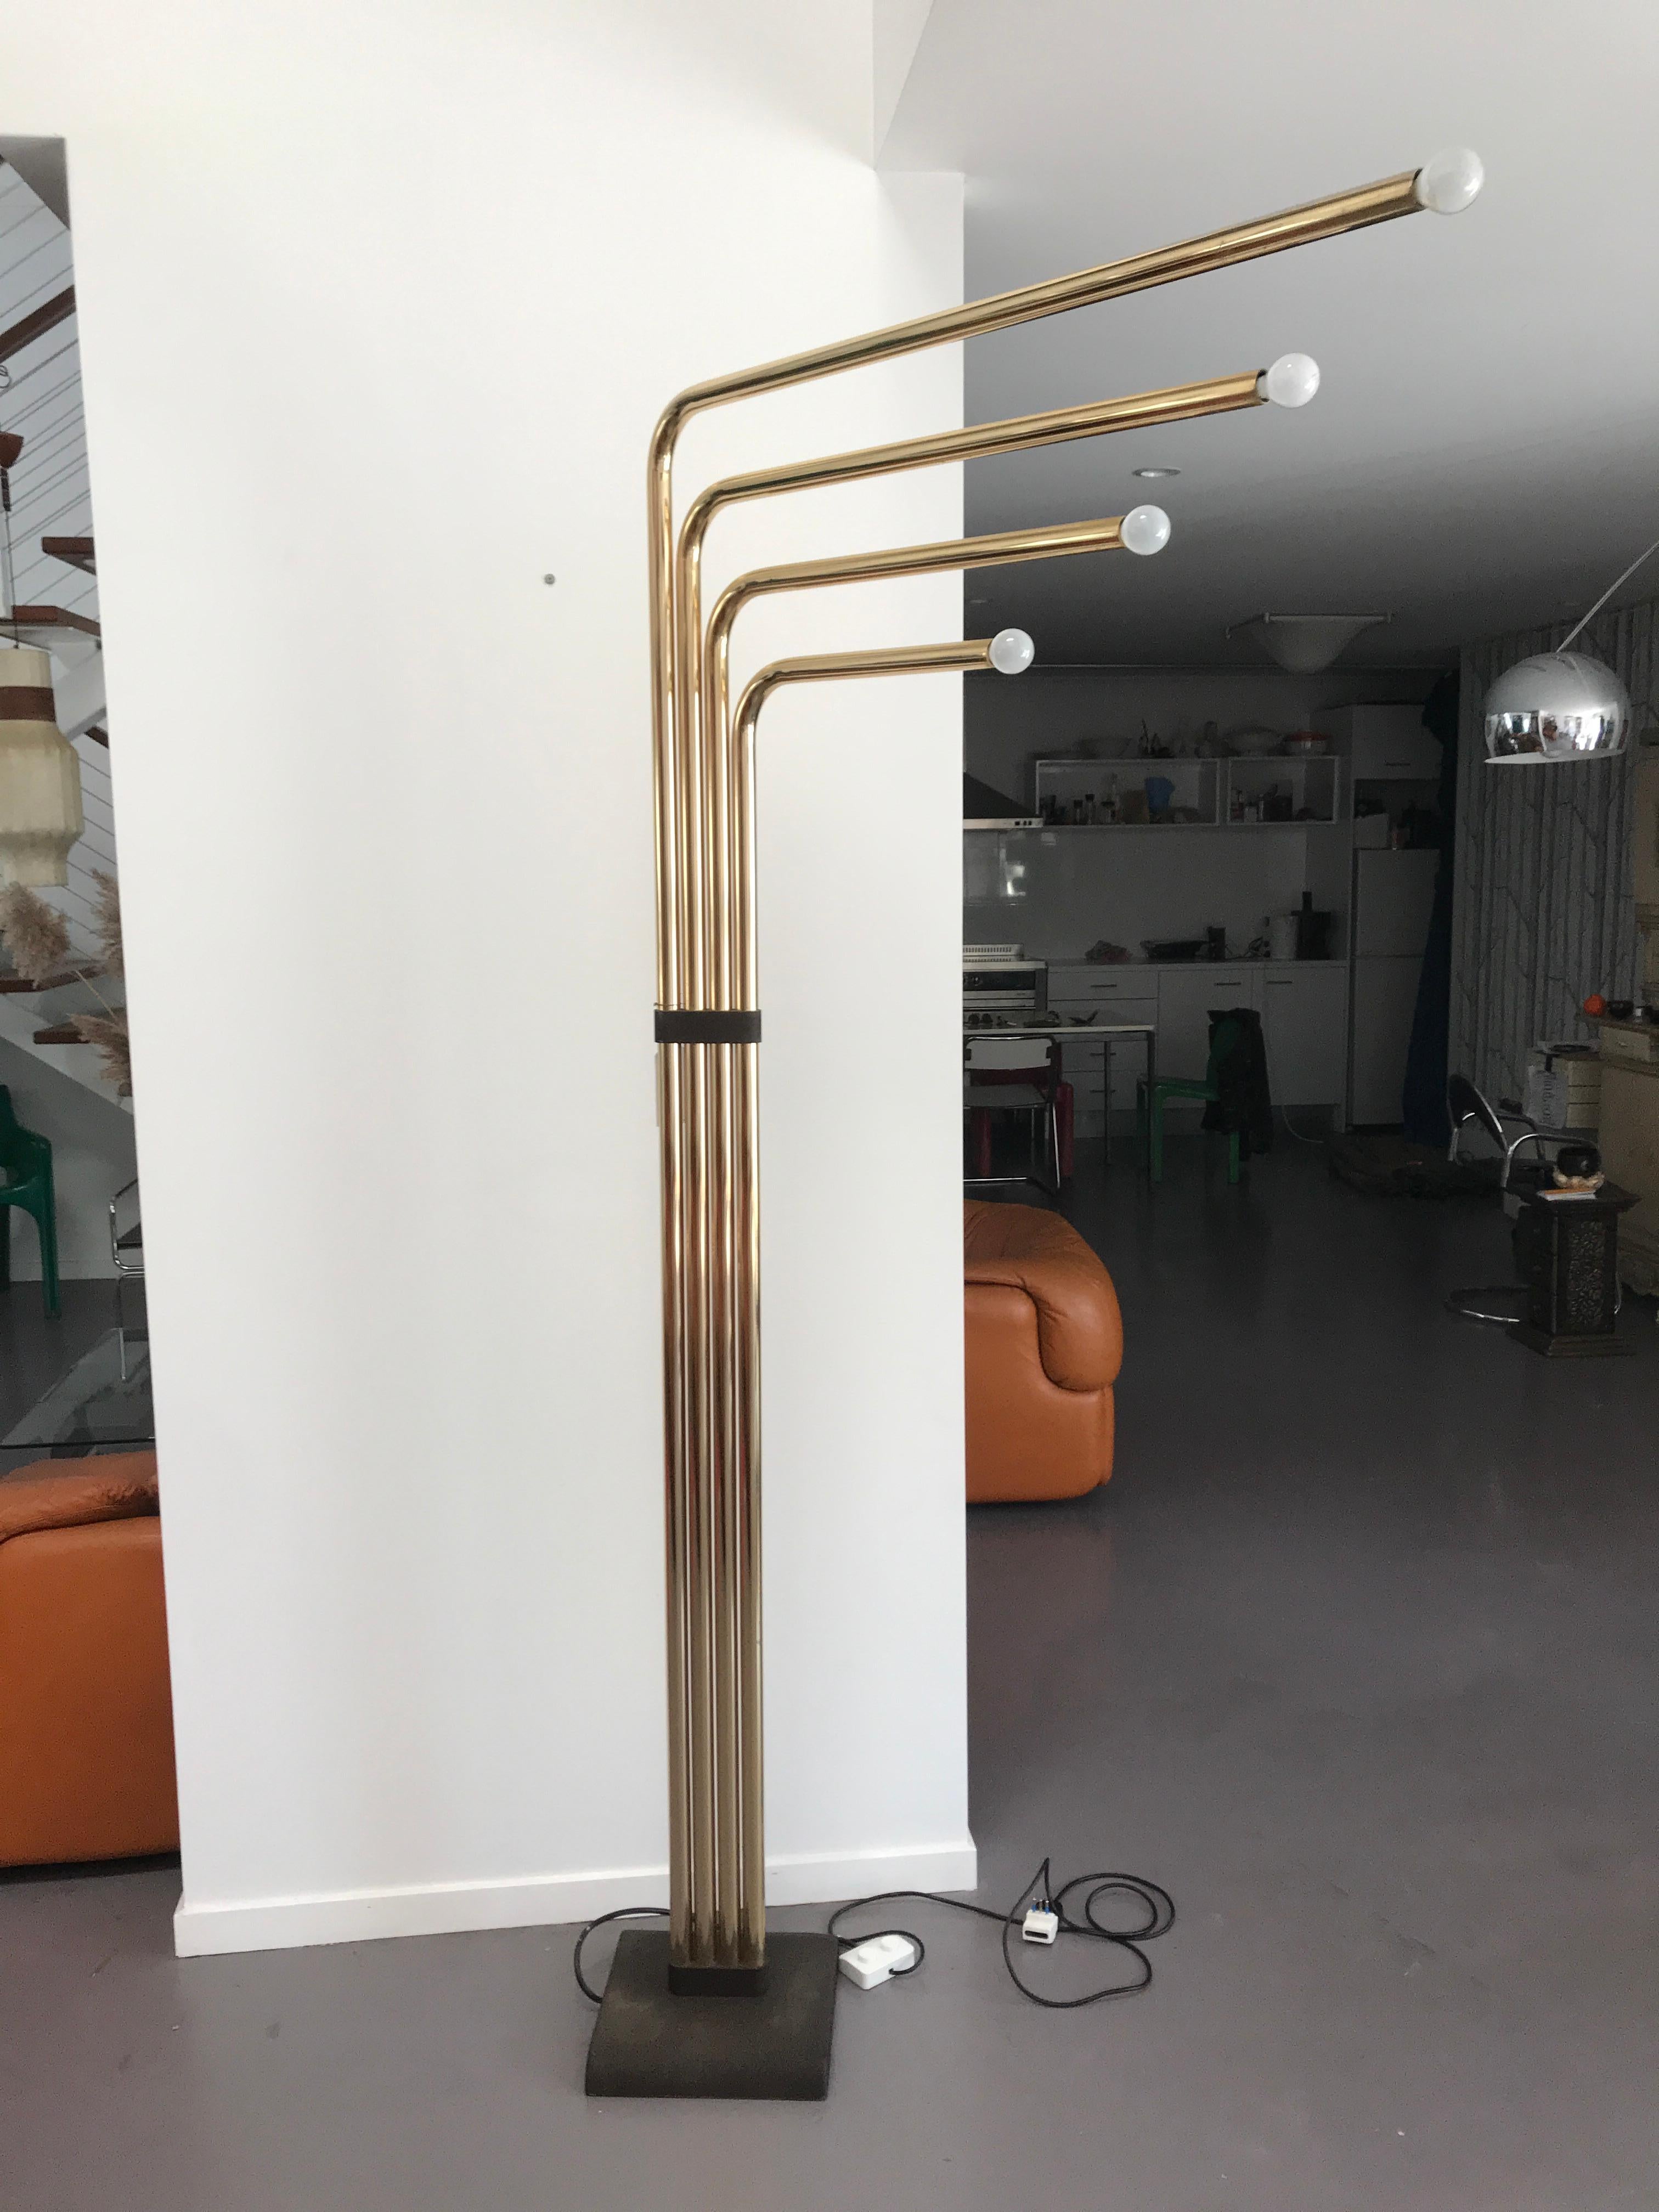 Brass floor lamp by Goffredo Reggiani for Reggiani Illuminazione, 1974. Reggiani uses chrome, opal glass and teak, to create Space Age designs, such Sputnik-style chandeliers or floor lamps with trumpet-shaped diffusers. This floor lamp has a solid